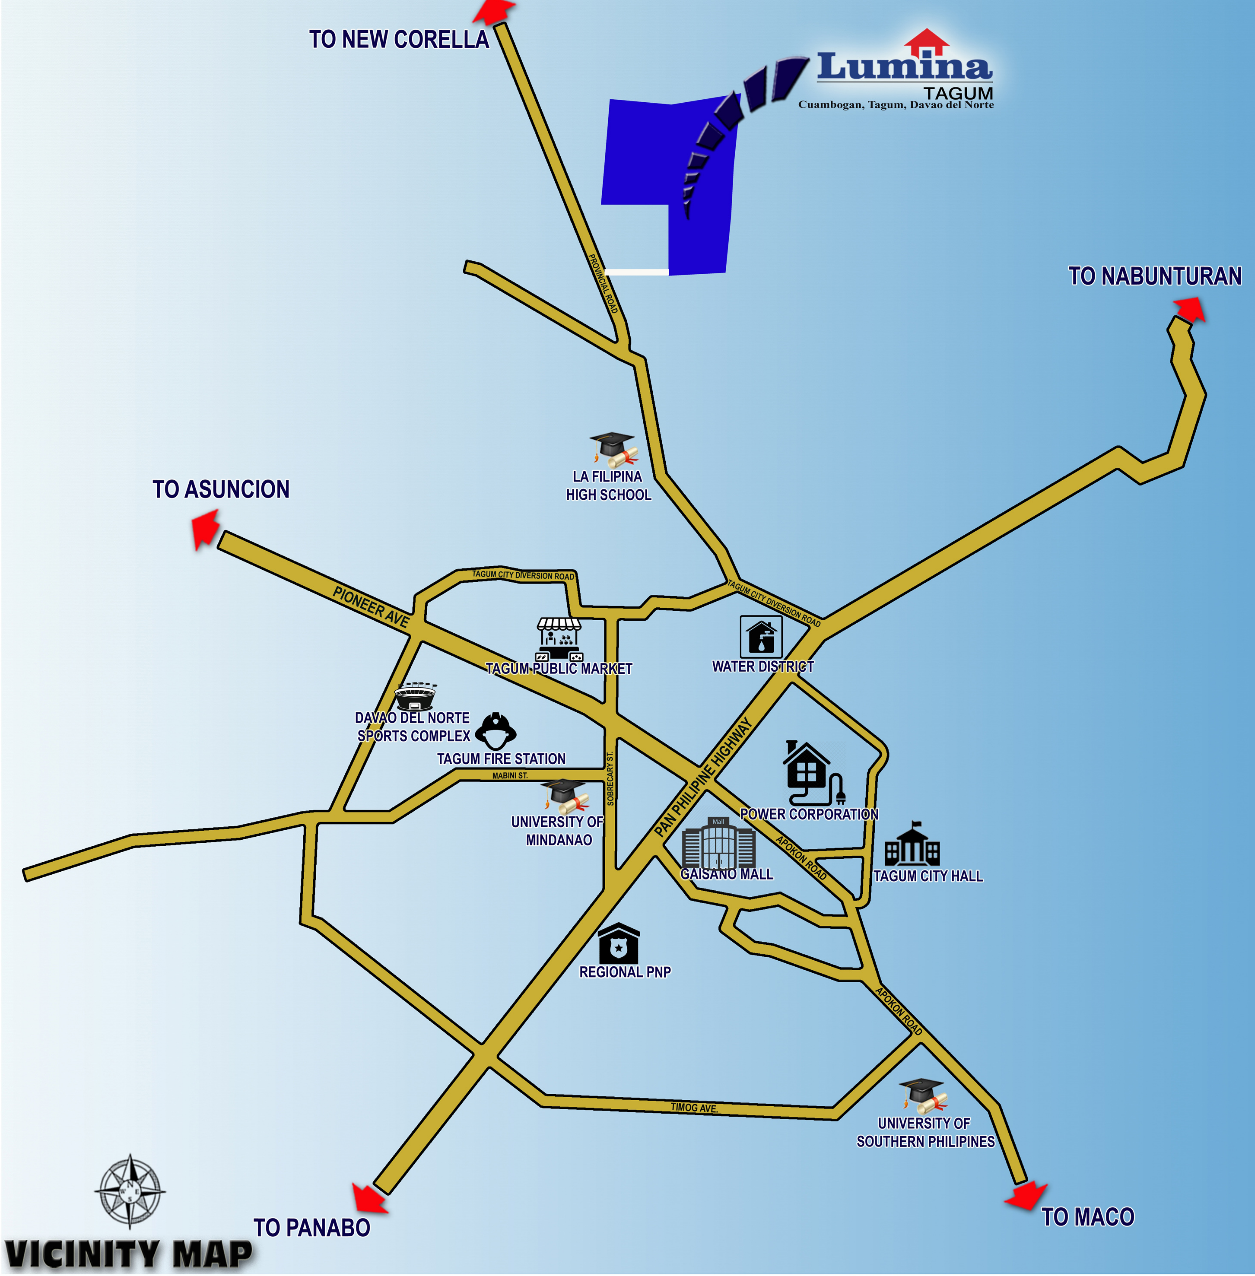 VICINITY-MAP-1635233800.png